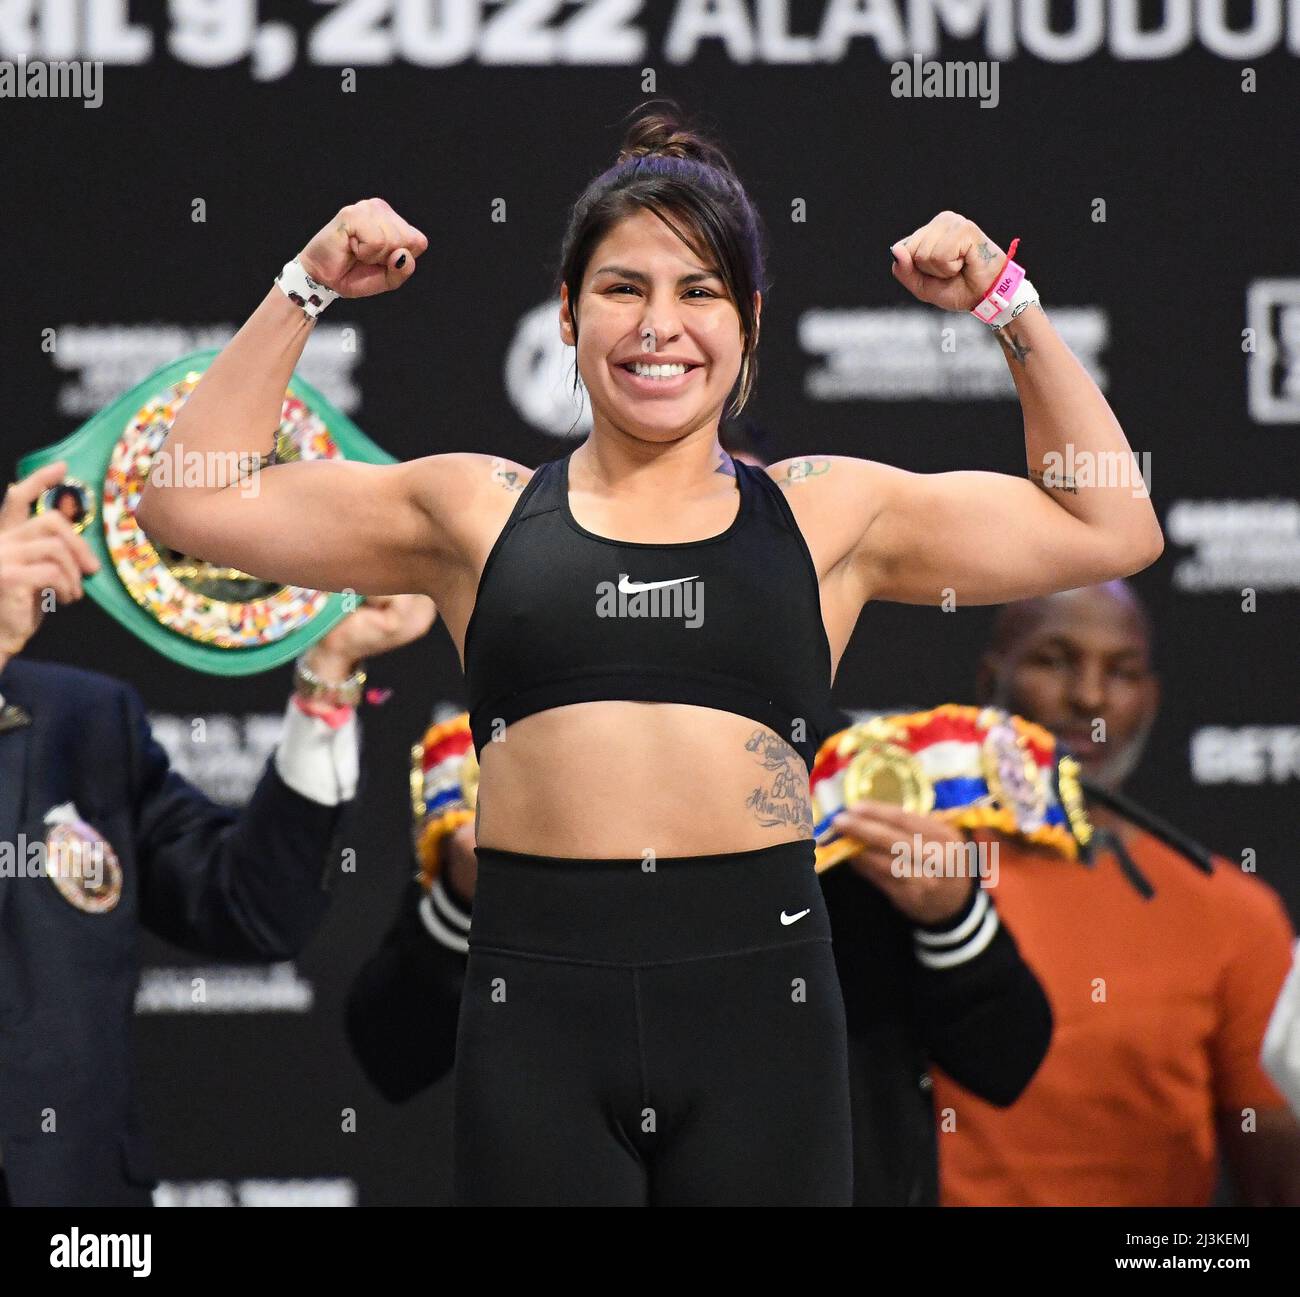 Texas, USA. 08th Apr, 2022. SAN ANTONIO, TX - APRIL 8: Marlen Esparza (111.4lbs) during the weigh-in for the WBA, WBC, & Vacant Ring Magazine Flyweight title against Naoka Fujioka (111.6) at the Alamodome Stadium, on April 8, 2022, in San Antonio, Texas, USA (Photo by Mikael Ona/PxImages) Credit: Px Images/Alamy Live News Stock Photo